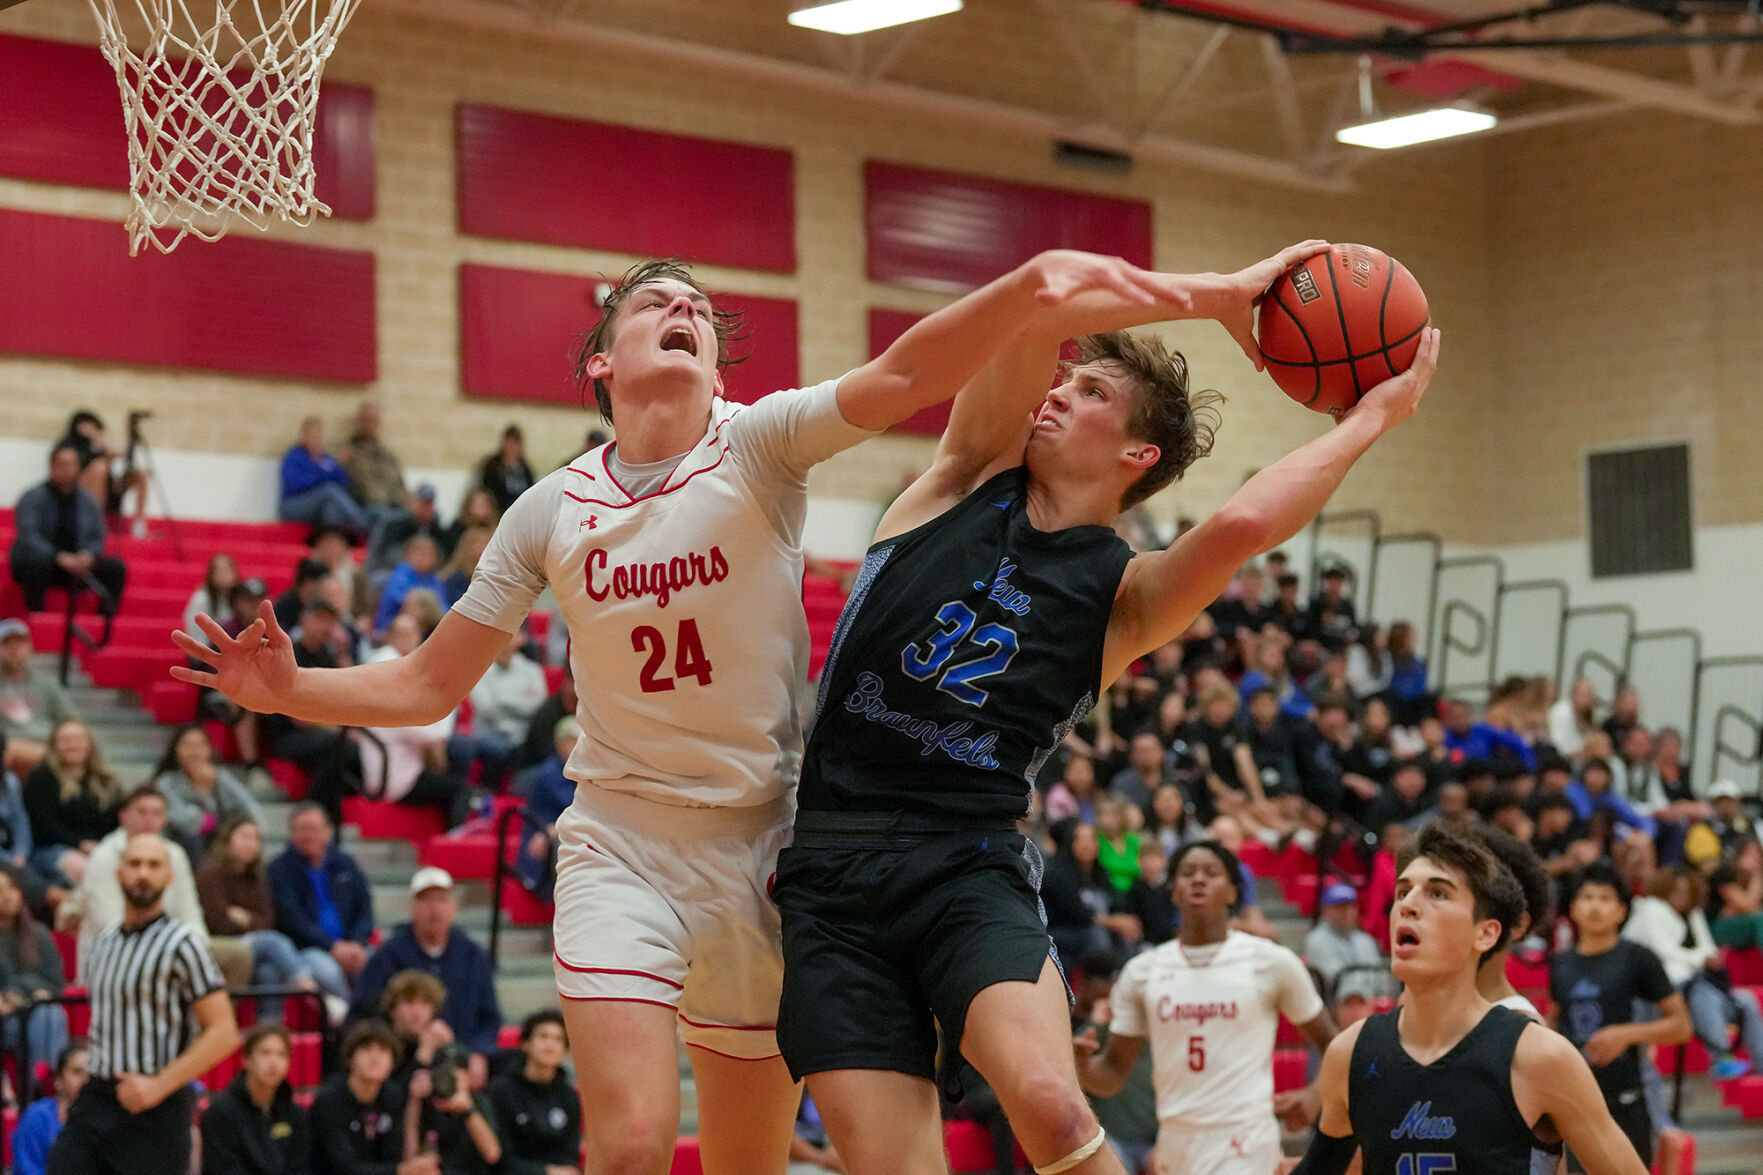 New Braunfels defeats Coogs in cross-town contest